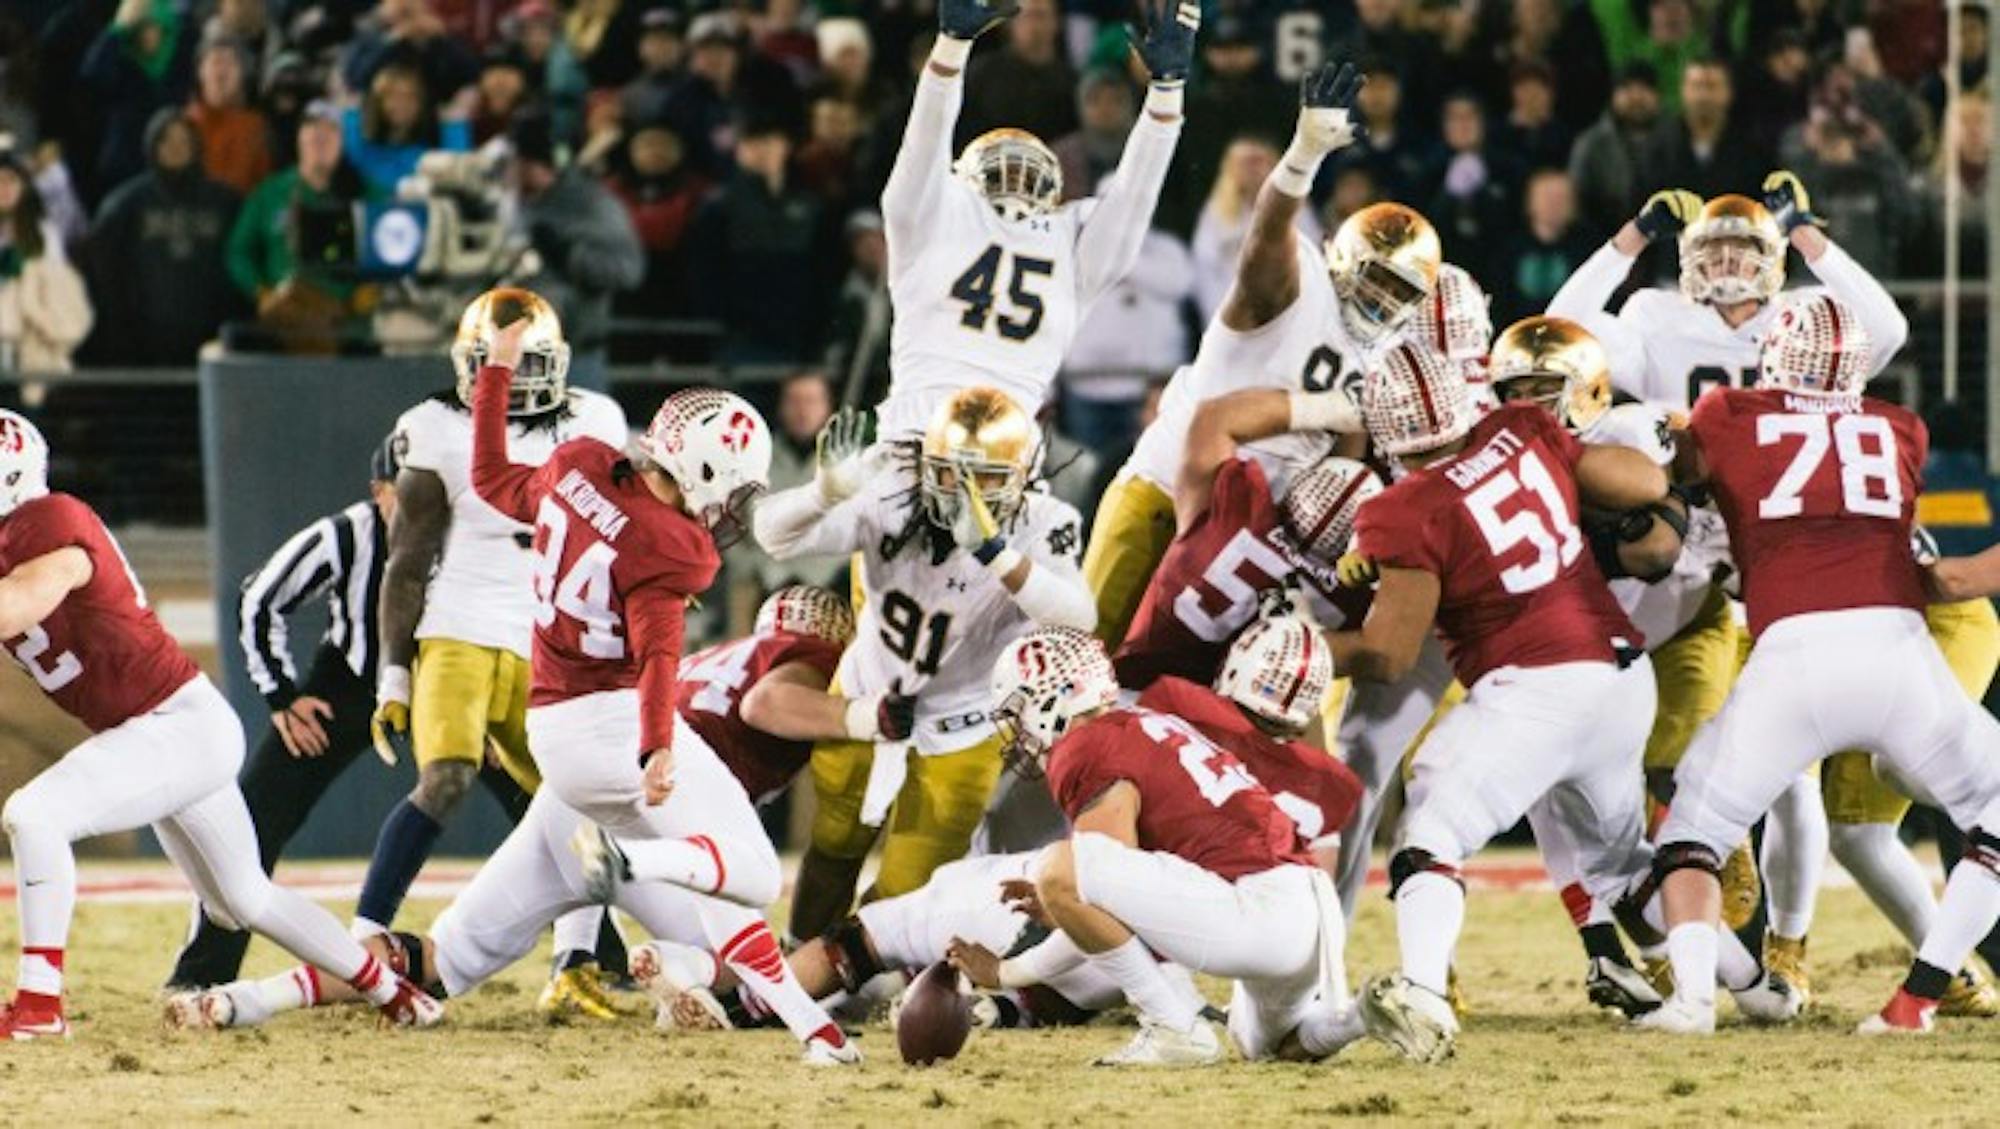 Stanford kicker Conrad Ukropina kicks the game-winning 45-yard field goal to lift the Cardinal over Notre Dame, 38-36, at Stanford Stadium on Nov. 28. The annual rivals are both ranked in the top ten of the preseason Coaches Poll.